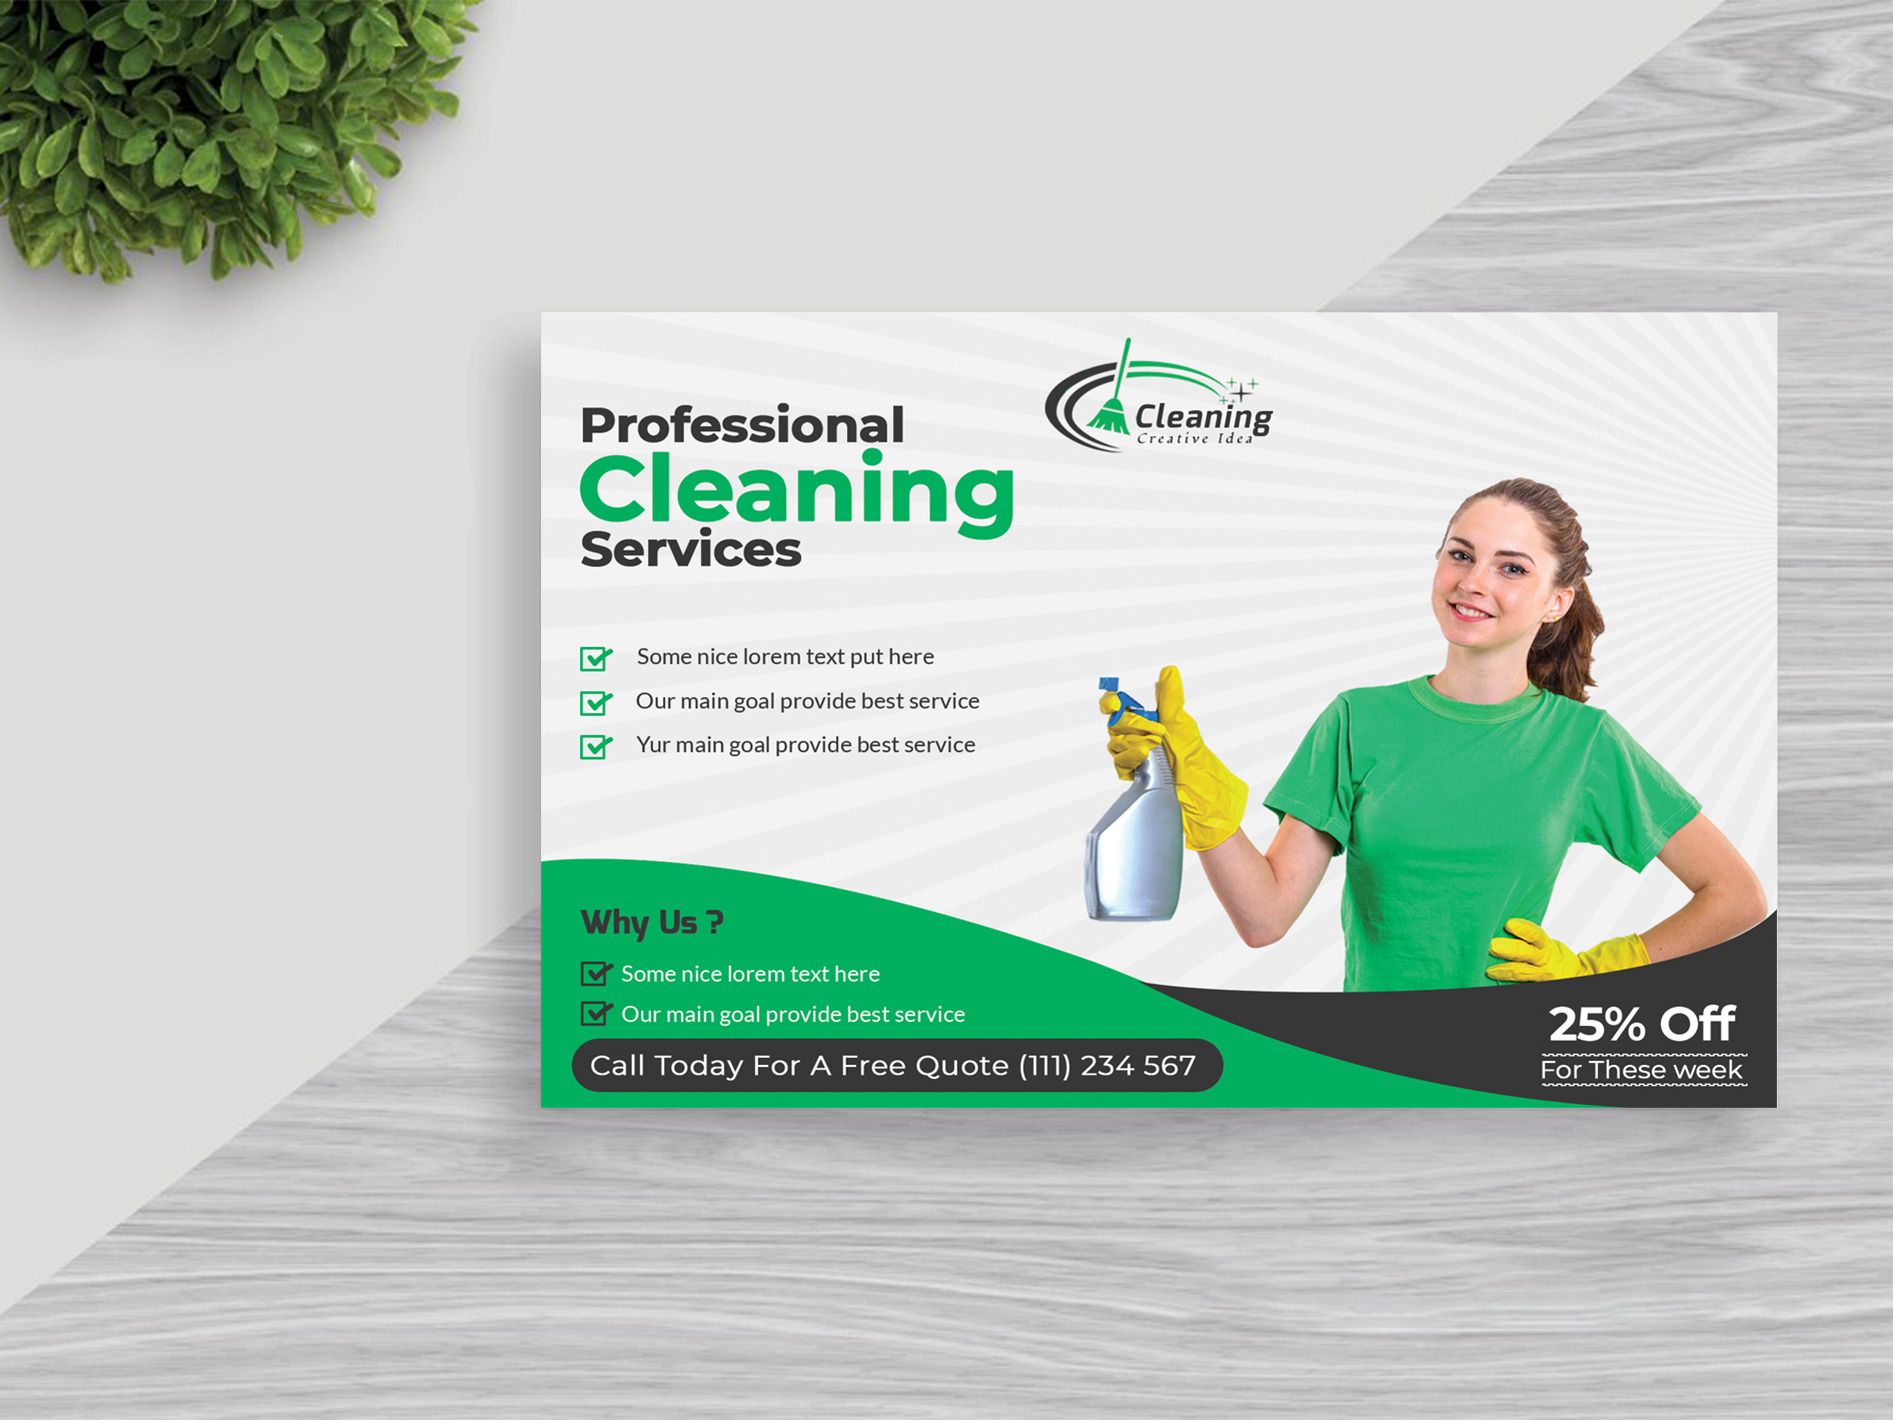 Visitors clean their. Cleaning service Design. Cleaning service logo Design. Cleaning service catalogue Design. Cleaning service Business Cards.